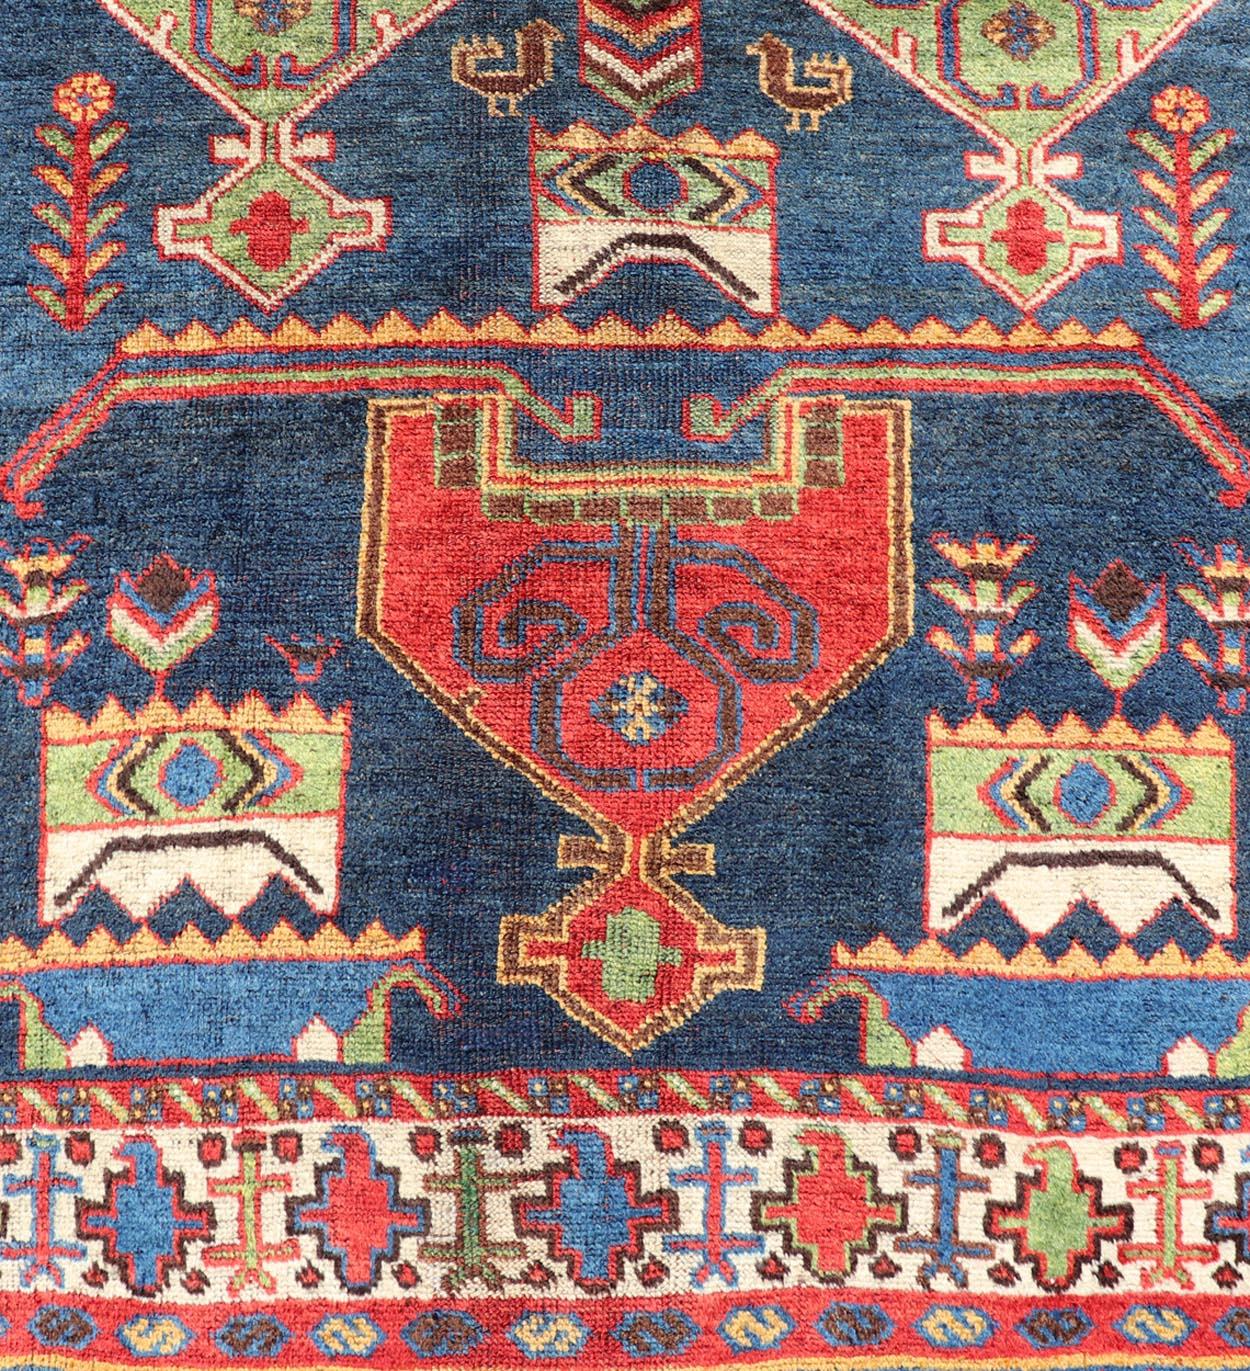 Caucasian Colorful Antique Persian Lori Rug with All-Over Geometric Tribal Design For Sale